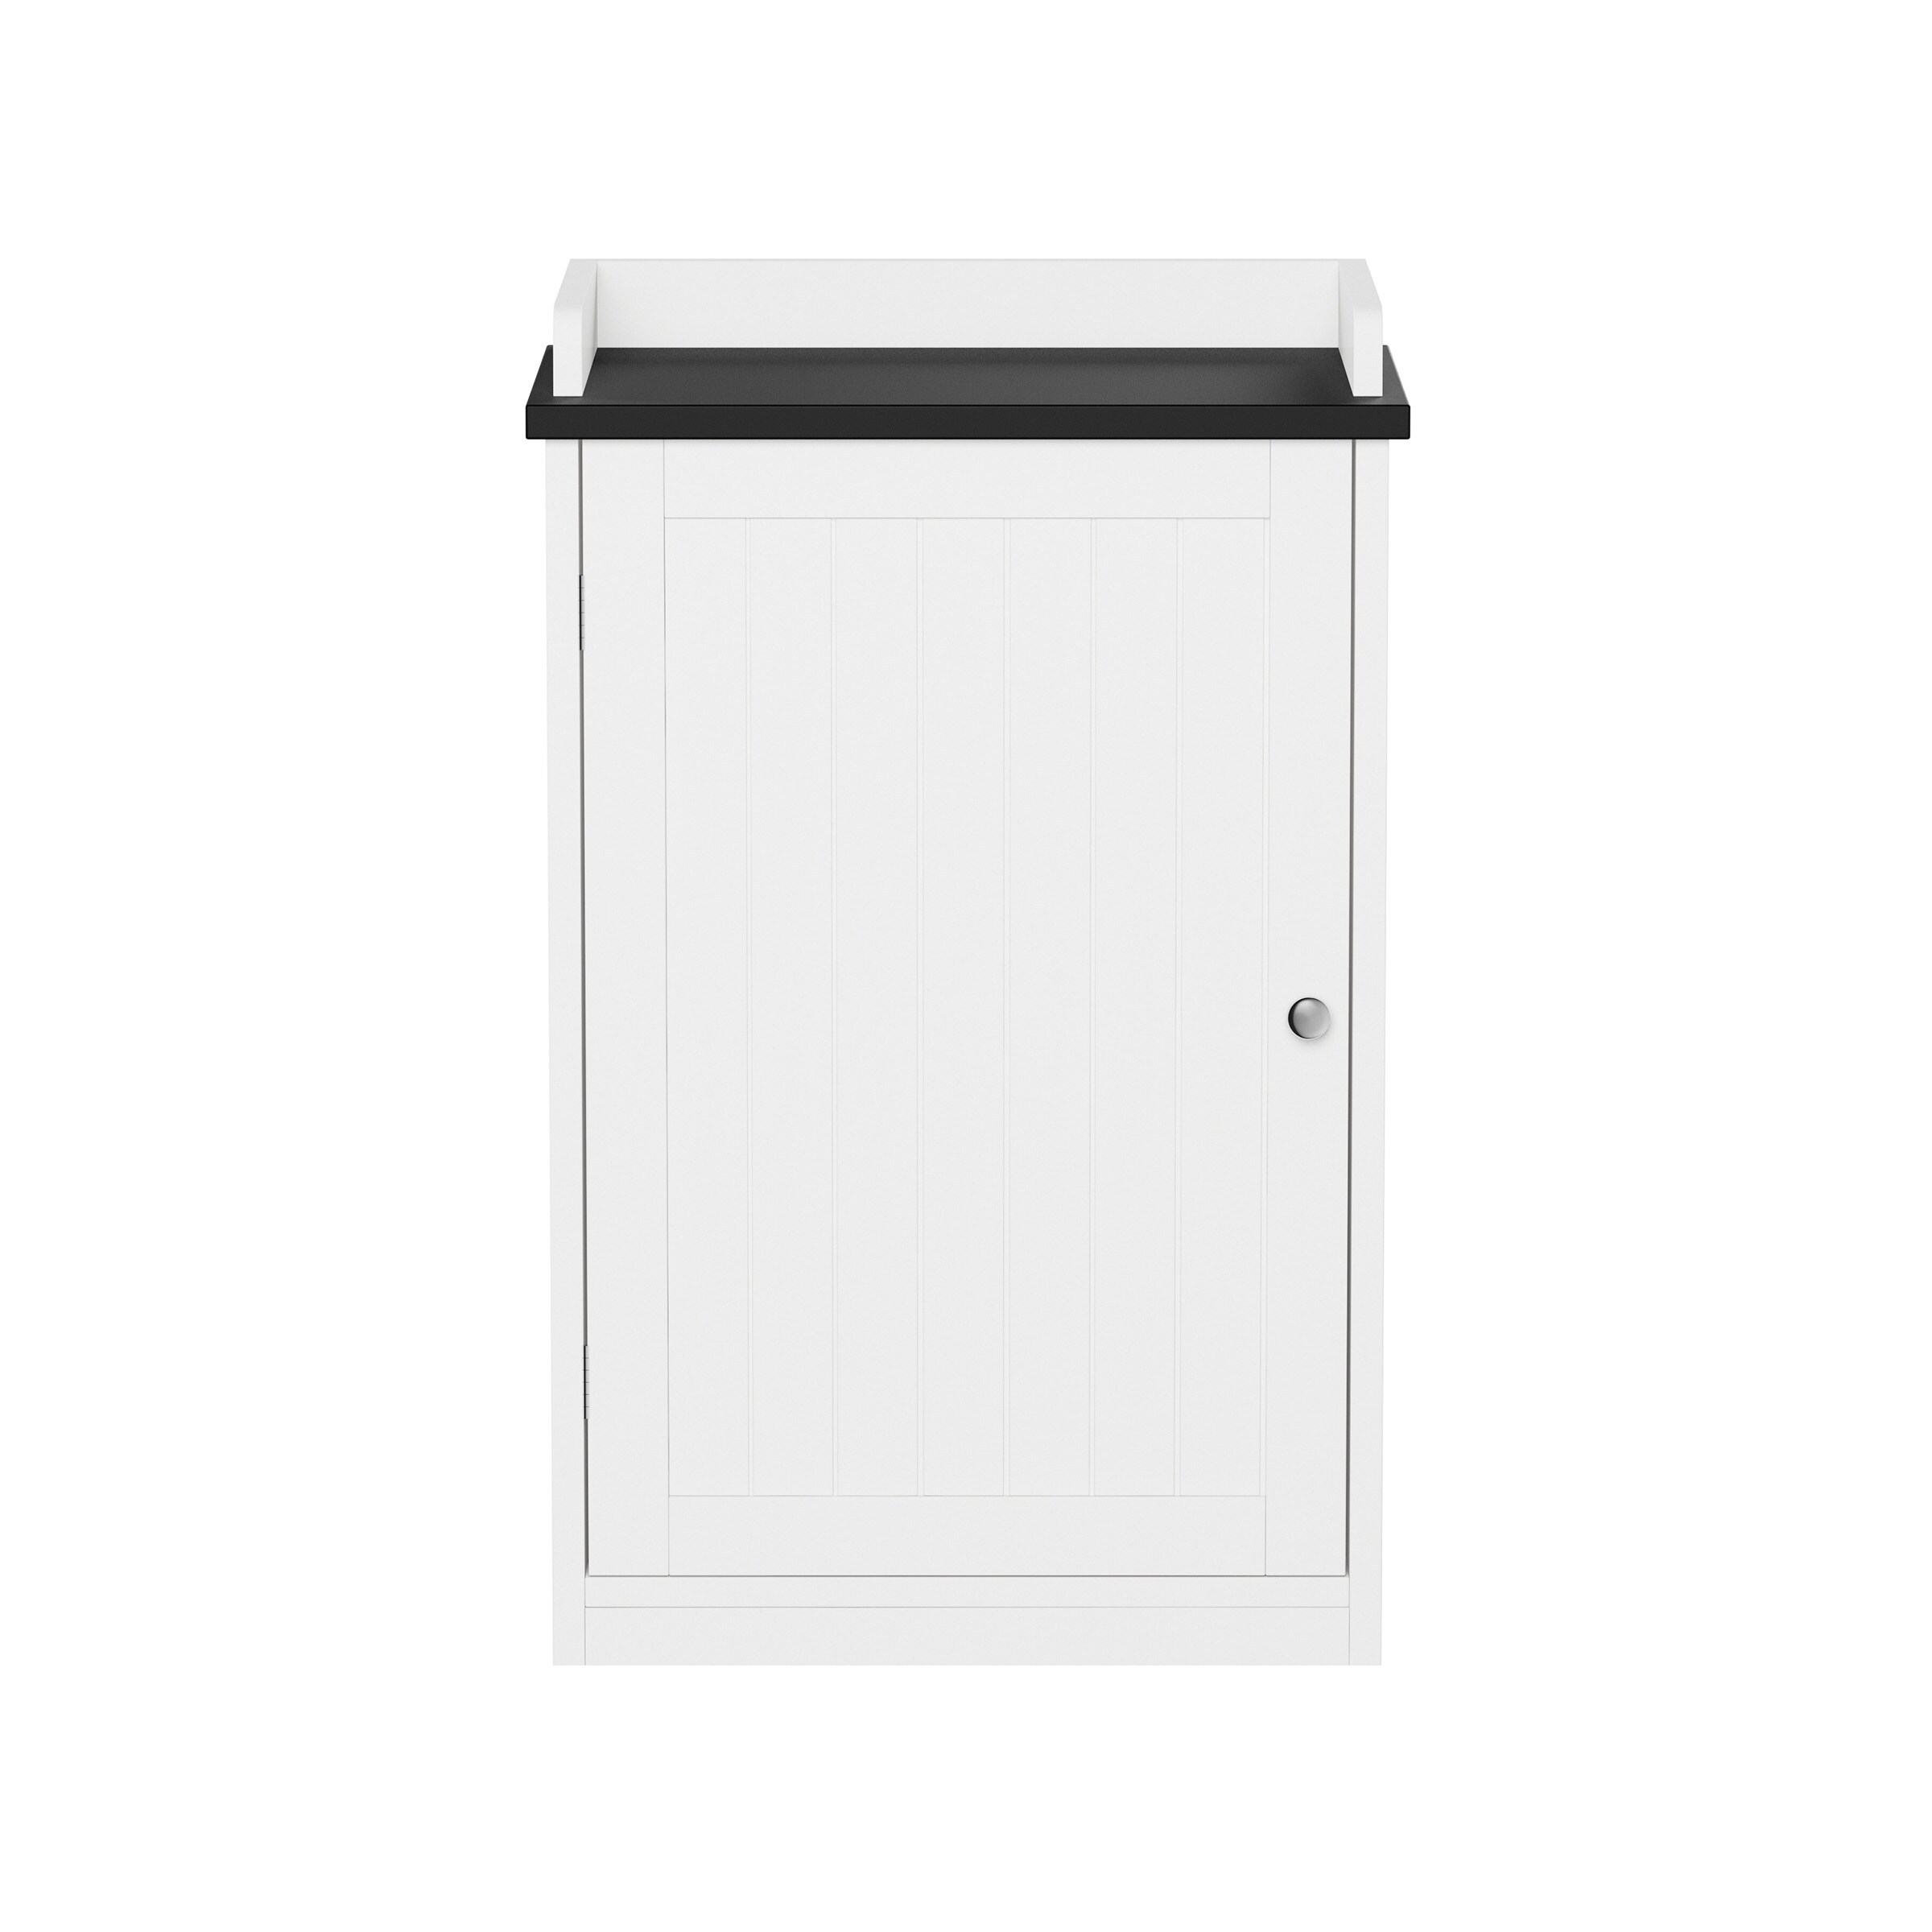 https://ak1.ostkcdn.com/images/products/is/images/direct/fe6c720e1f8ddd213a3887113b1a755c93e5949c/Hastings-Home-Bathroom-Storage-Cabinet-%E2%80%93-White.jpg